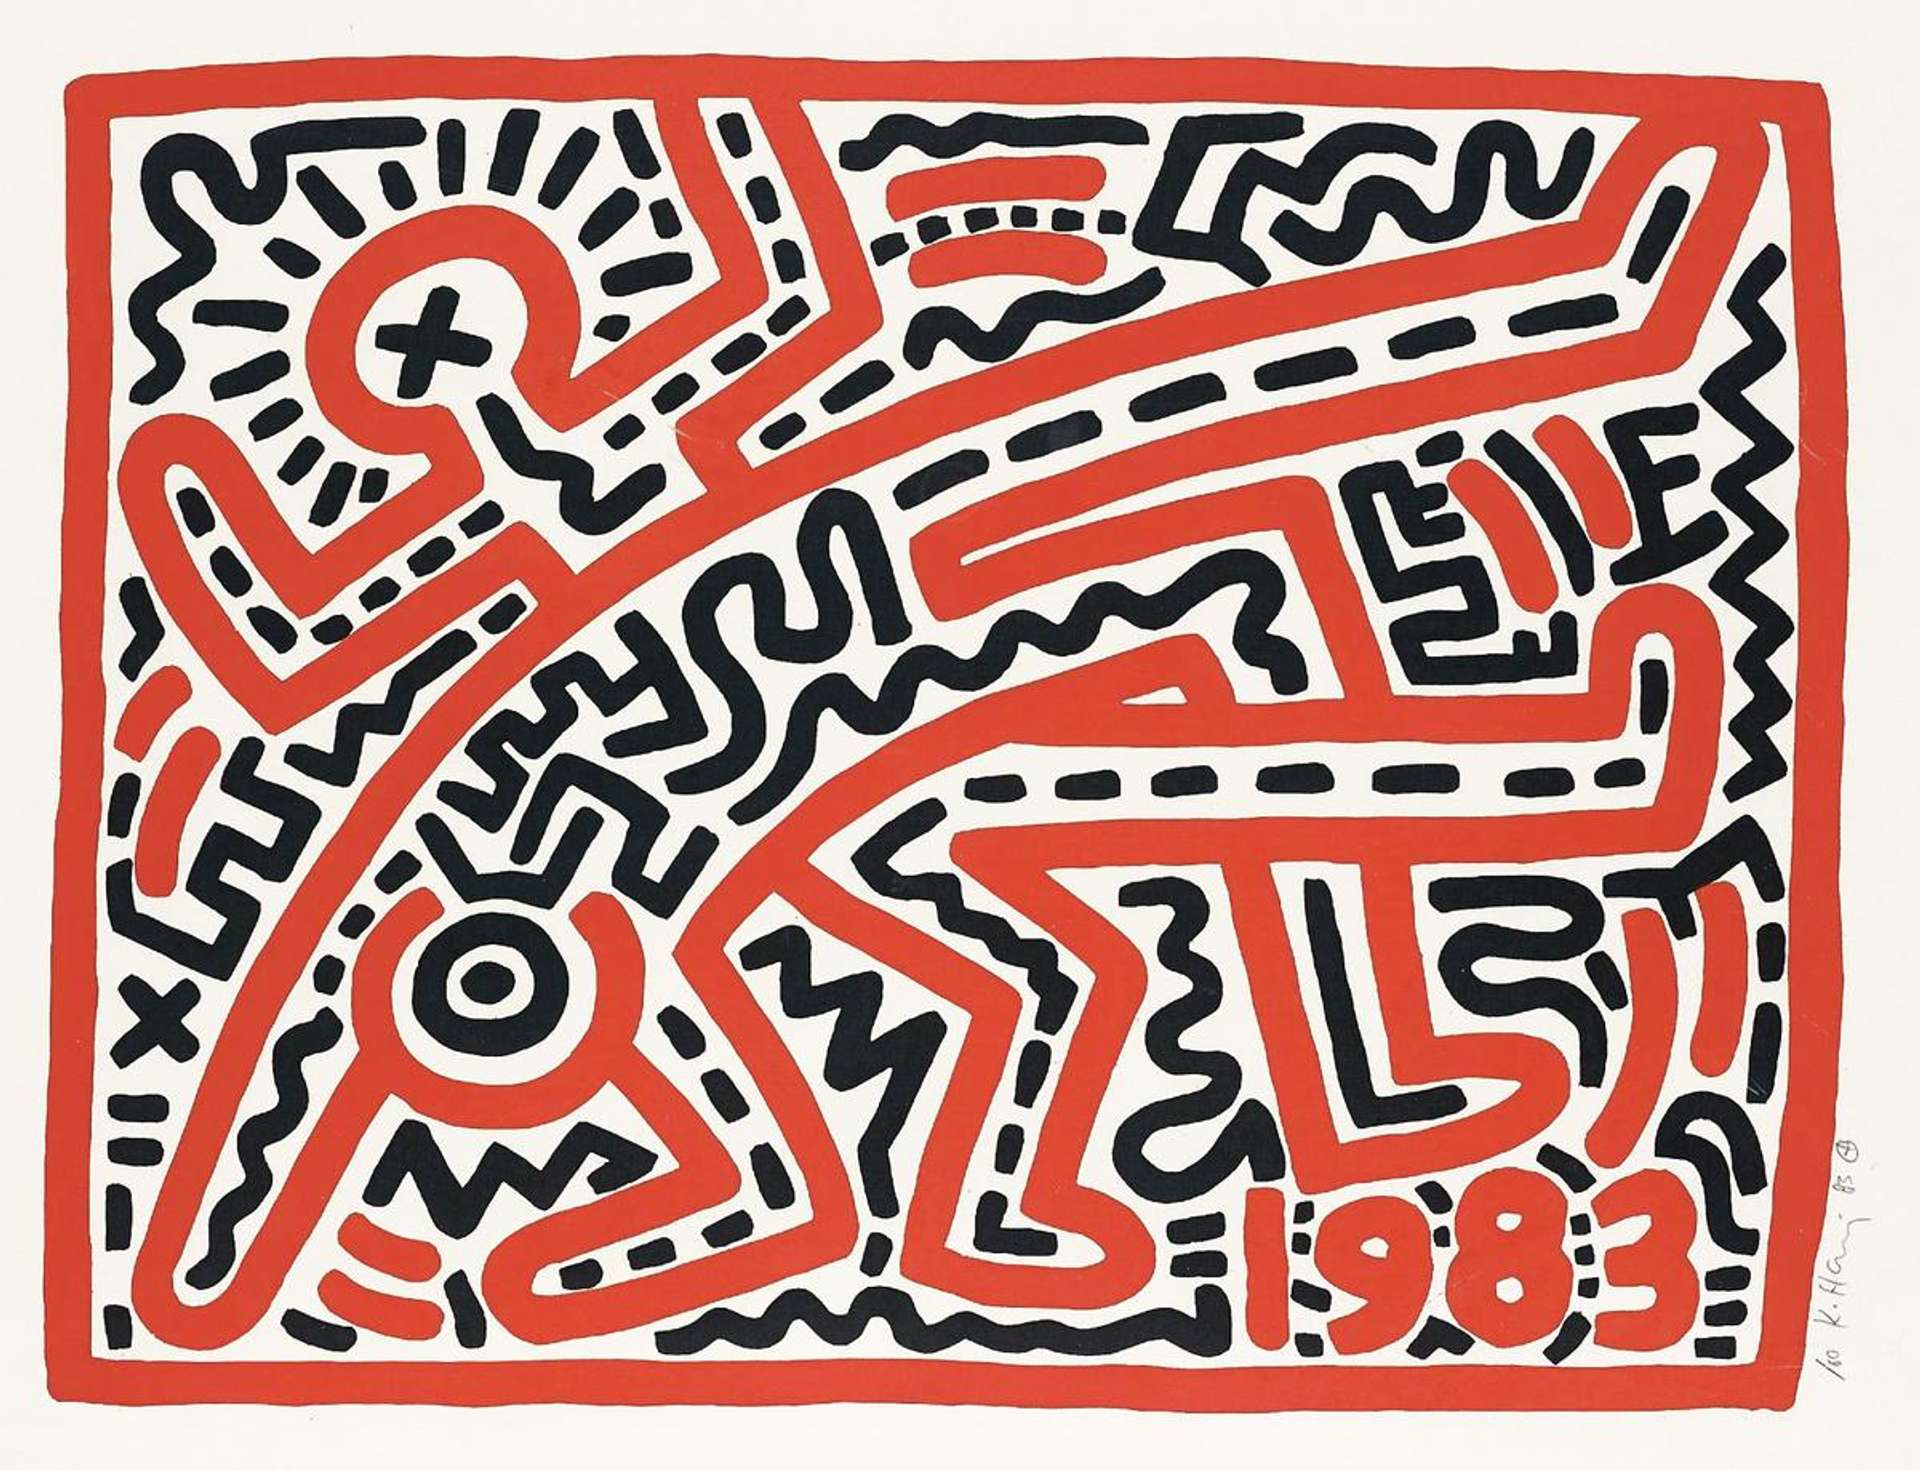 Untitled 1983 - Signed Print by Keith Haring 1983 - MyArtBroker